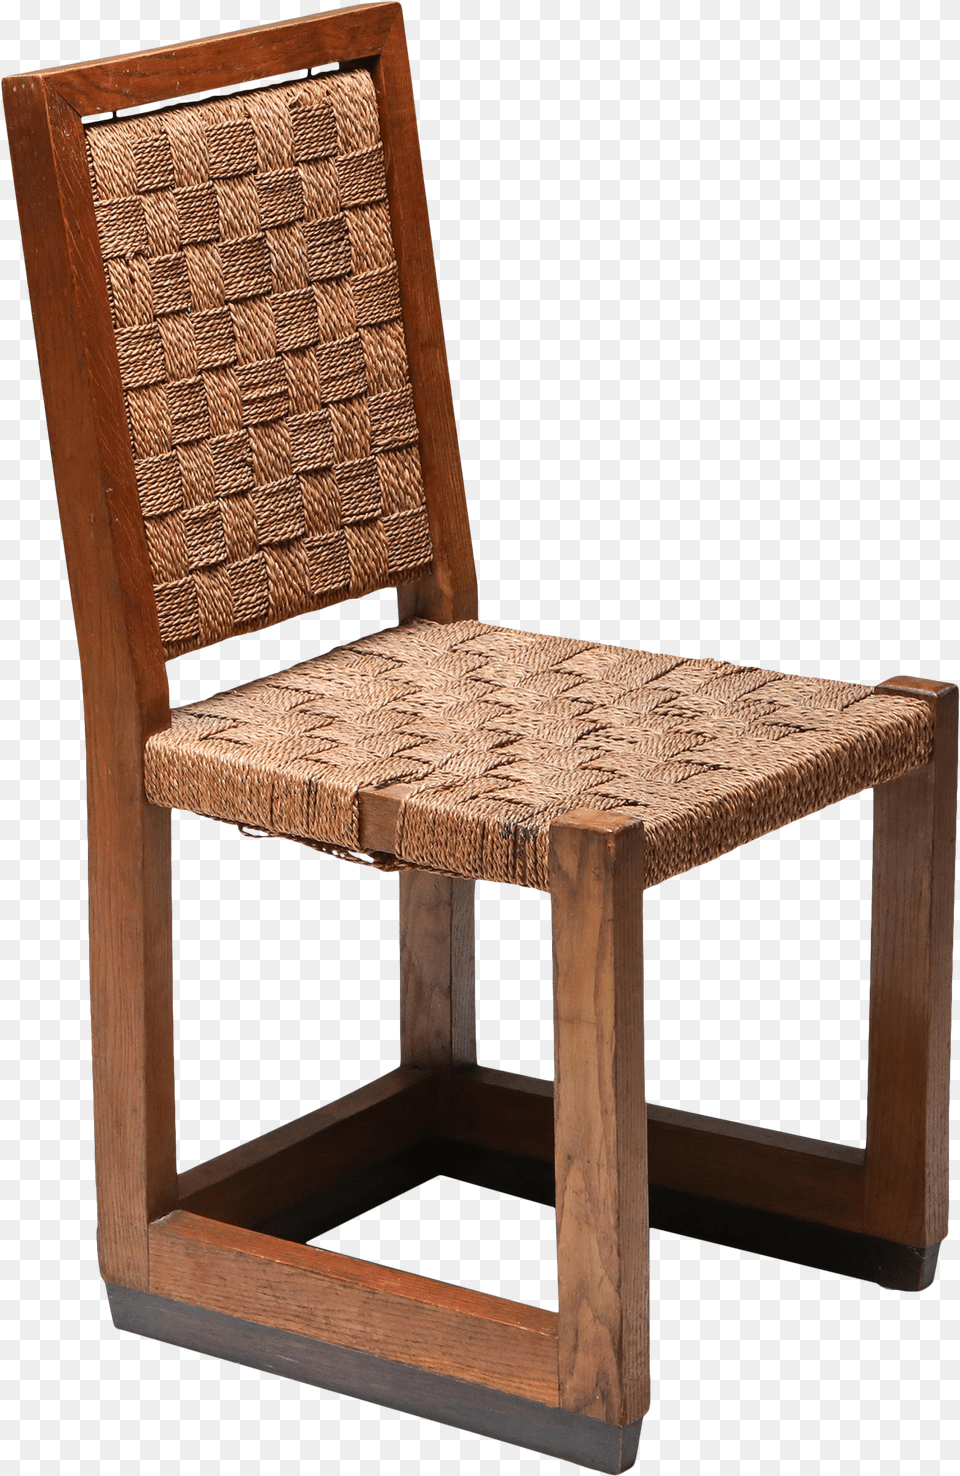 1920s Hague School Chair With Cord Seating Solid Back, Furniture Free Png Download